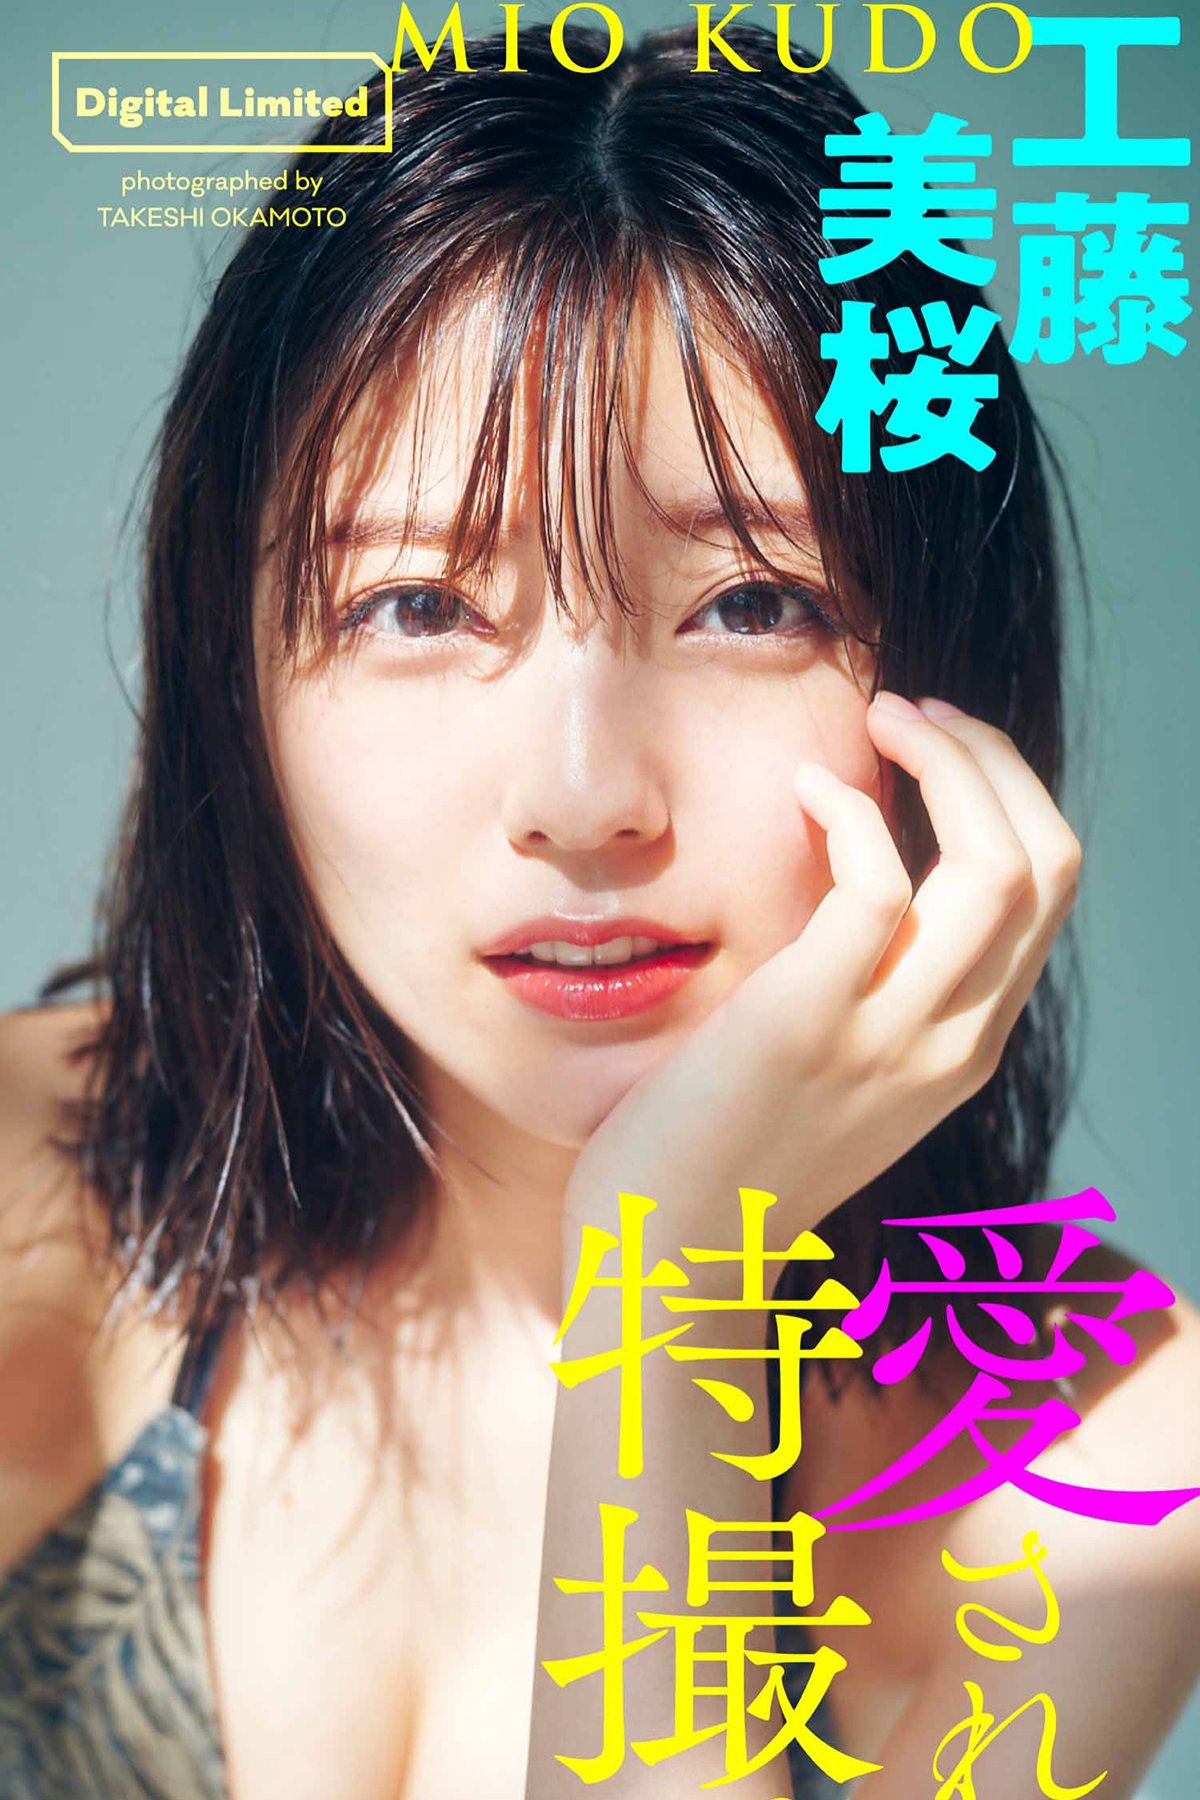 Digital Limited 2021-09-13 Mio Kudo 工藤美桜 – Be loved, special effects 愛されて、特撮